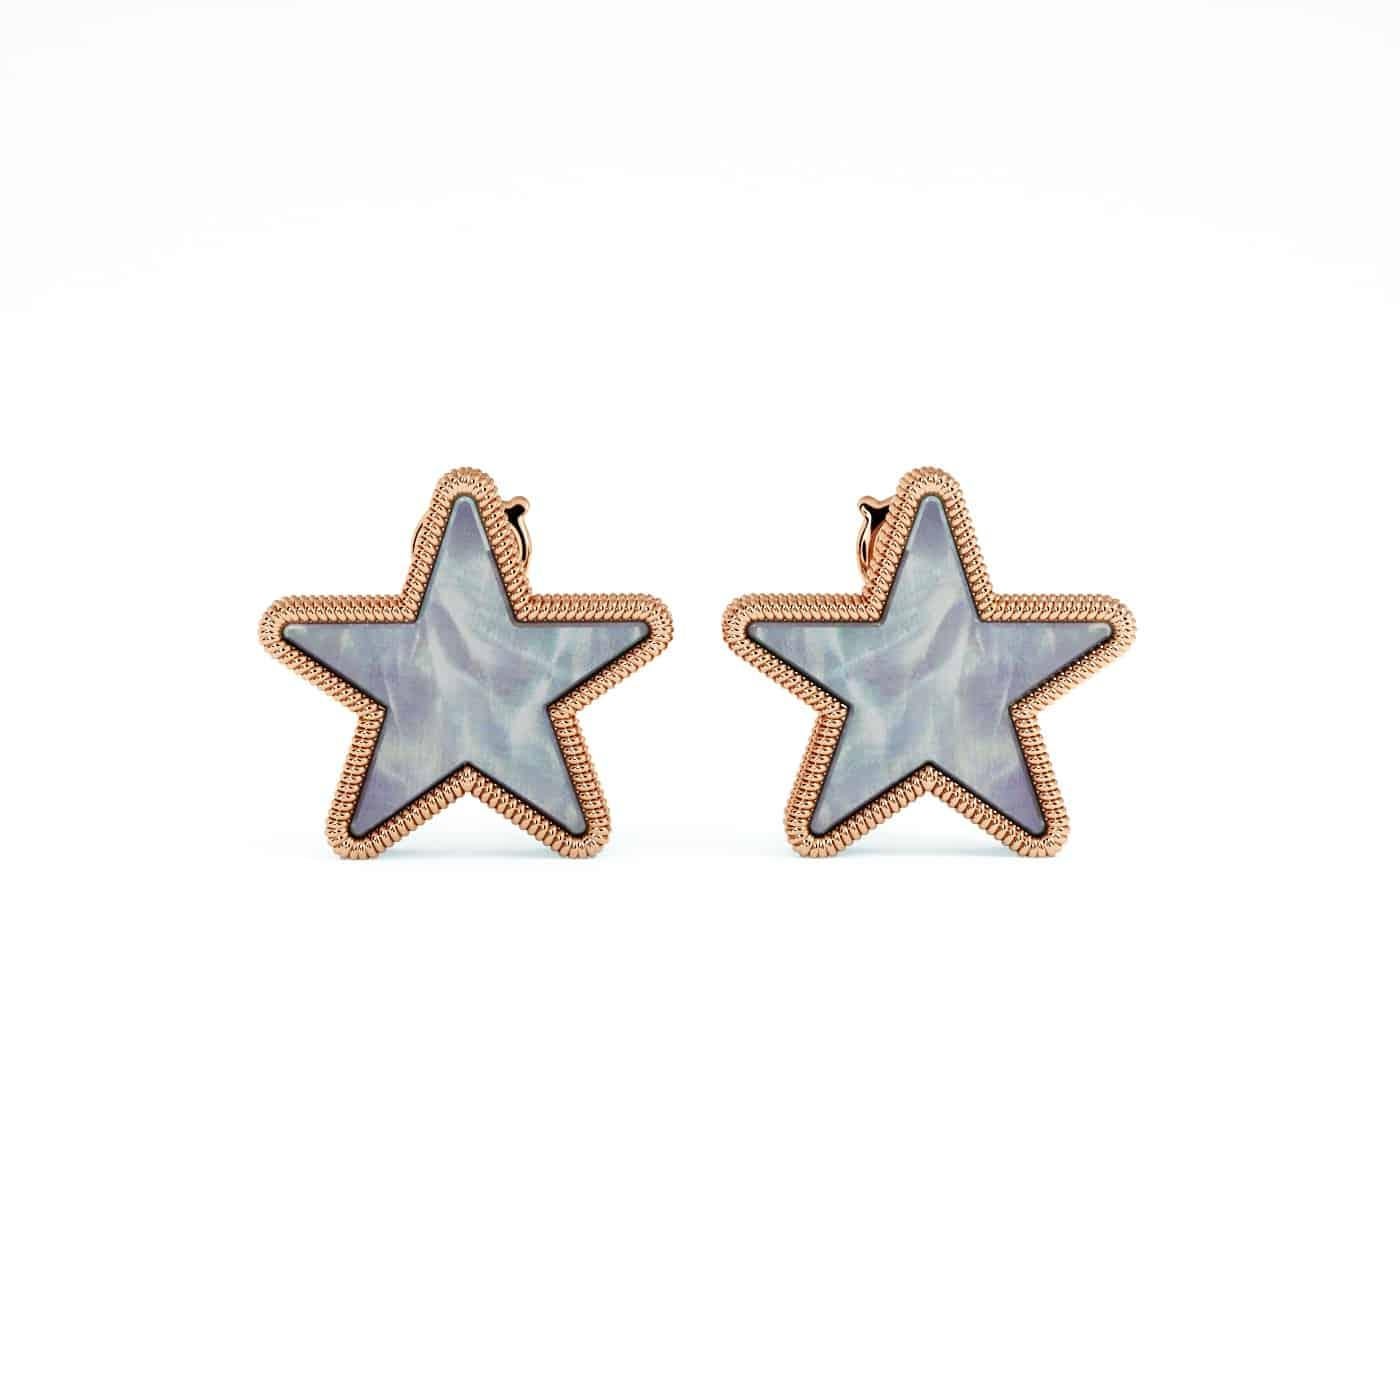 Modern Grey Mother of Pearl Star Earrings Set in 18K Gold In New Condition For Sale In Oakton, VA